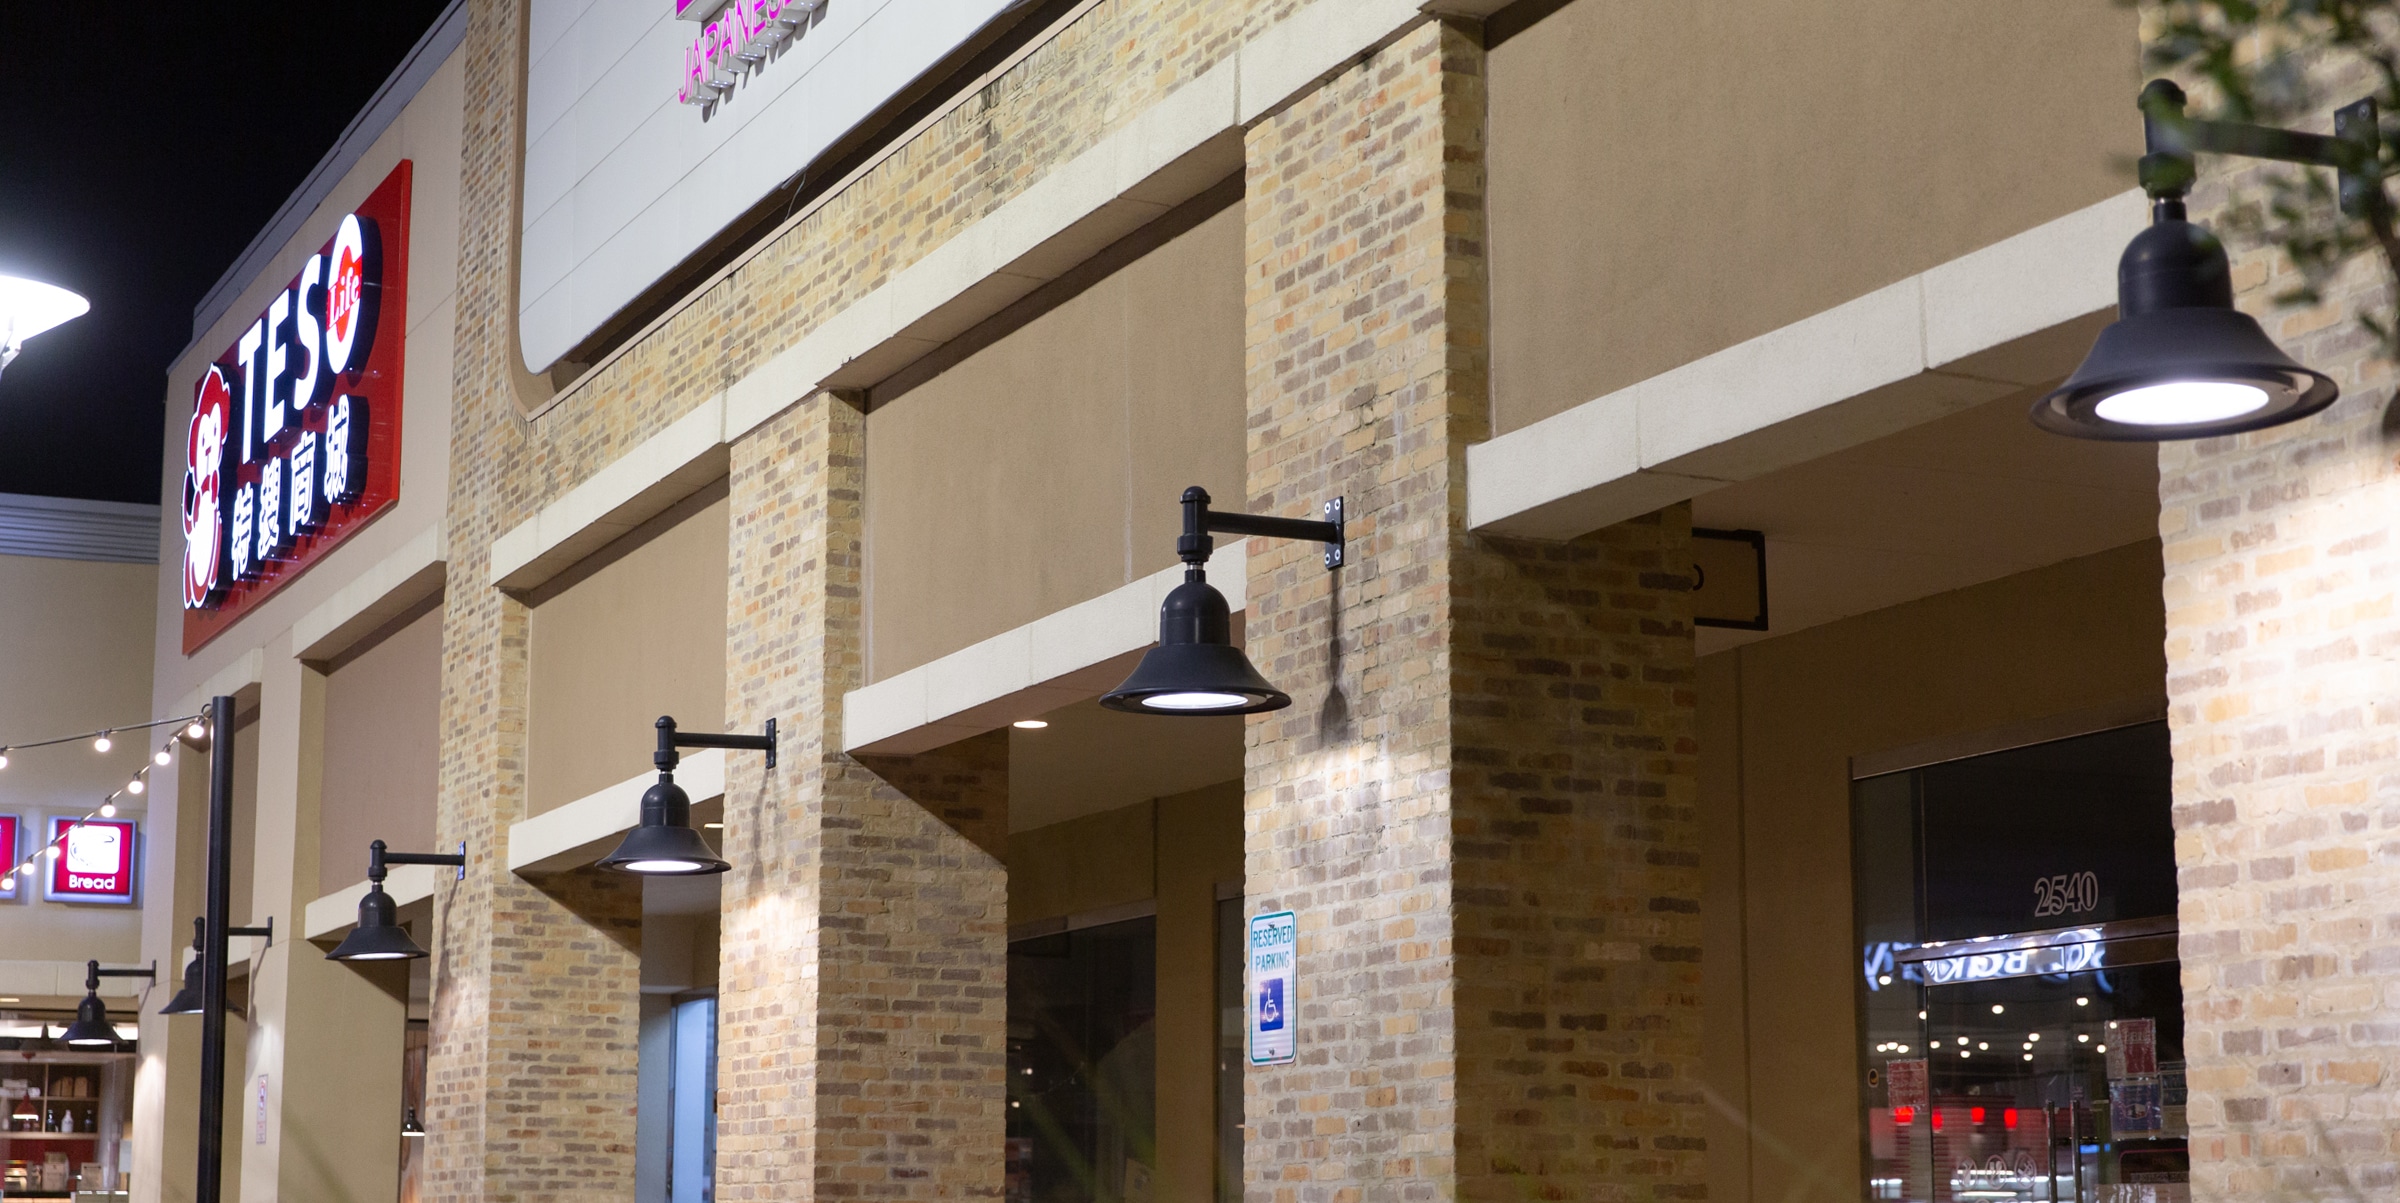 Casestudy Galleryimage Carrollton 5 - WLS Lighting Systems